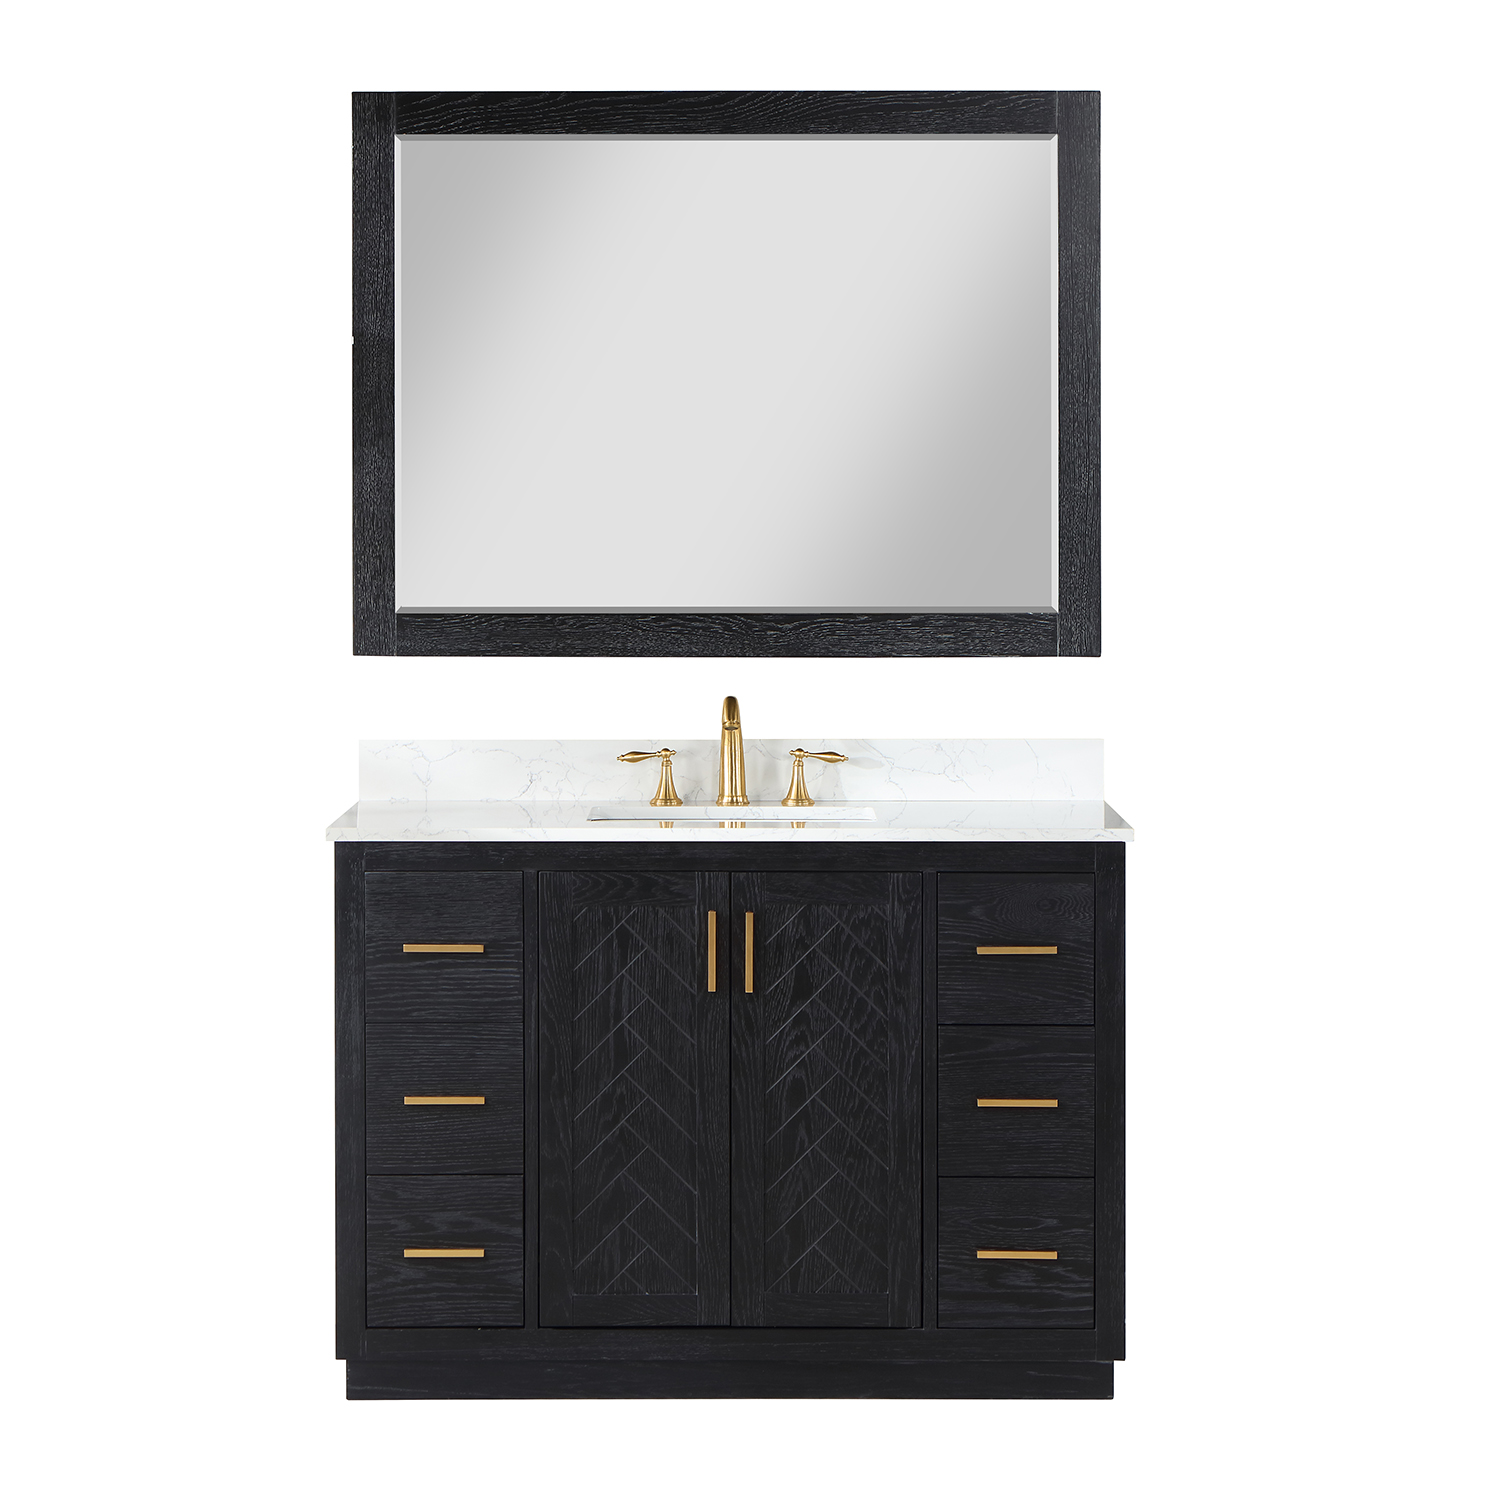 Issac Edwards Collection 48" Single Bathroom Vanity Set in Black Oak with Grain White Composite Stone Countertop without Mirror 